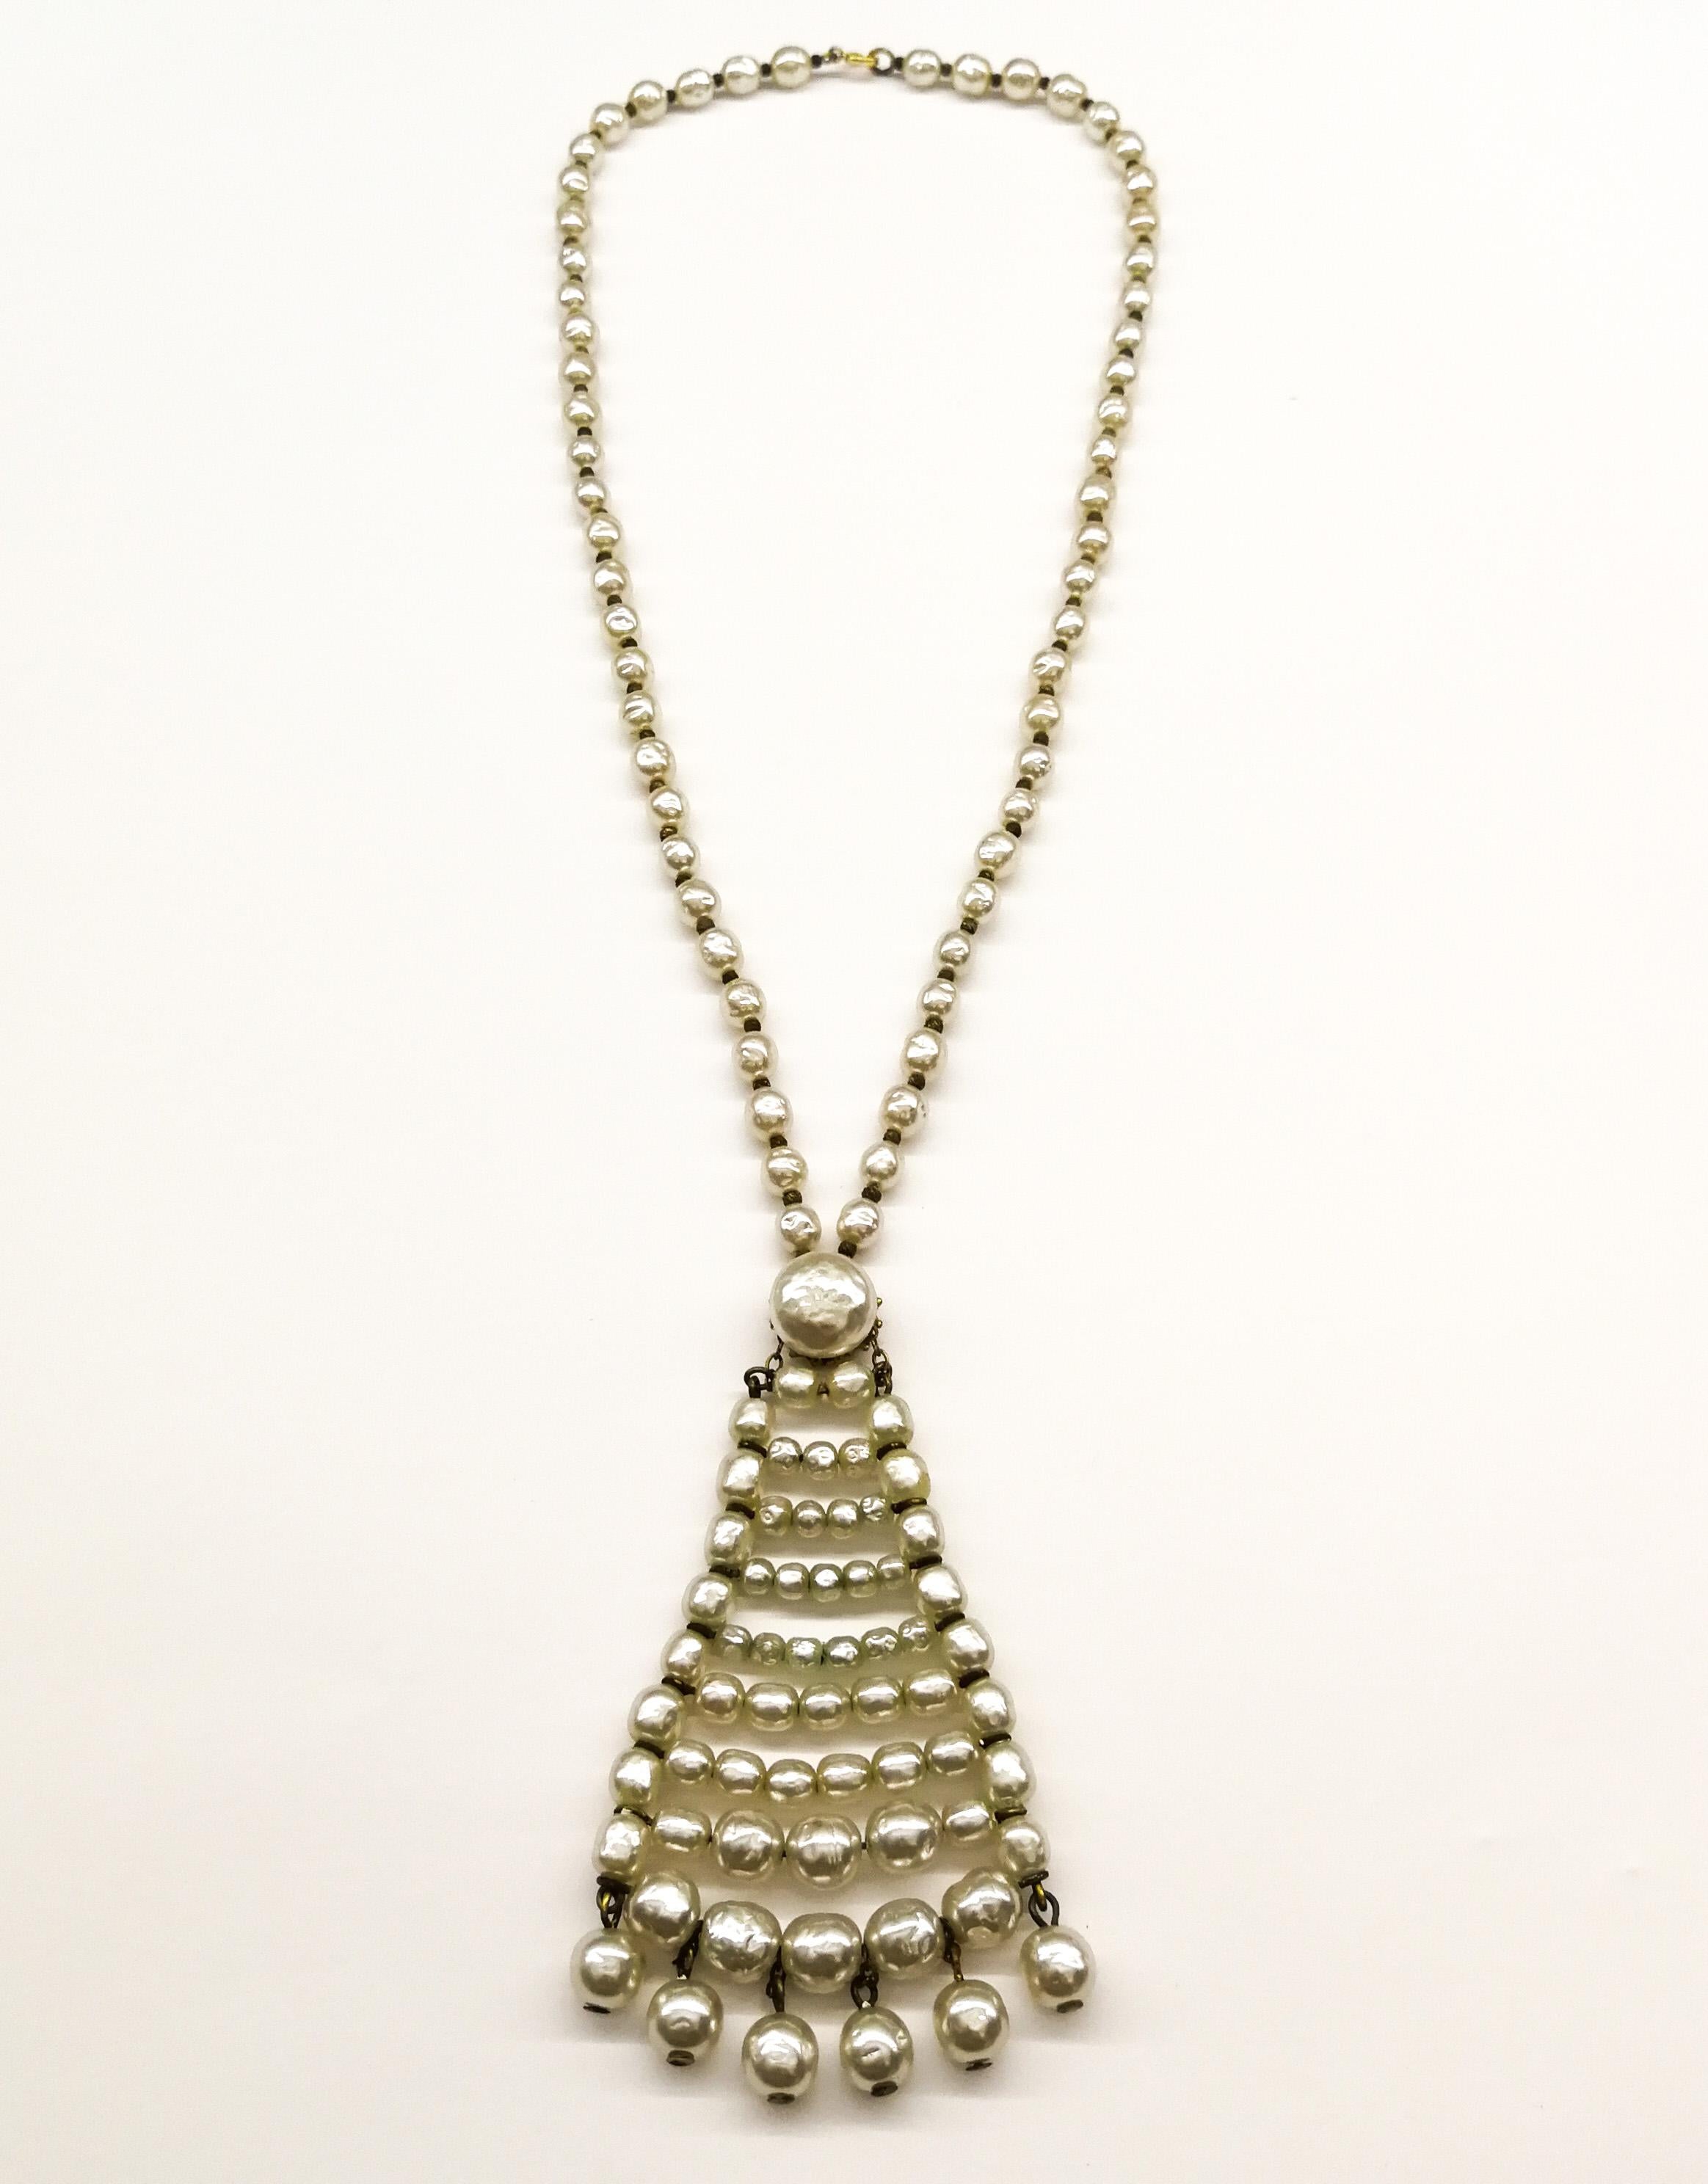 A long baroque pearl pendant necklace, Miriam Haskell, 1960s 10